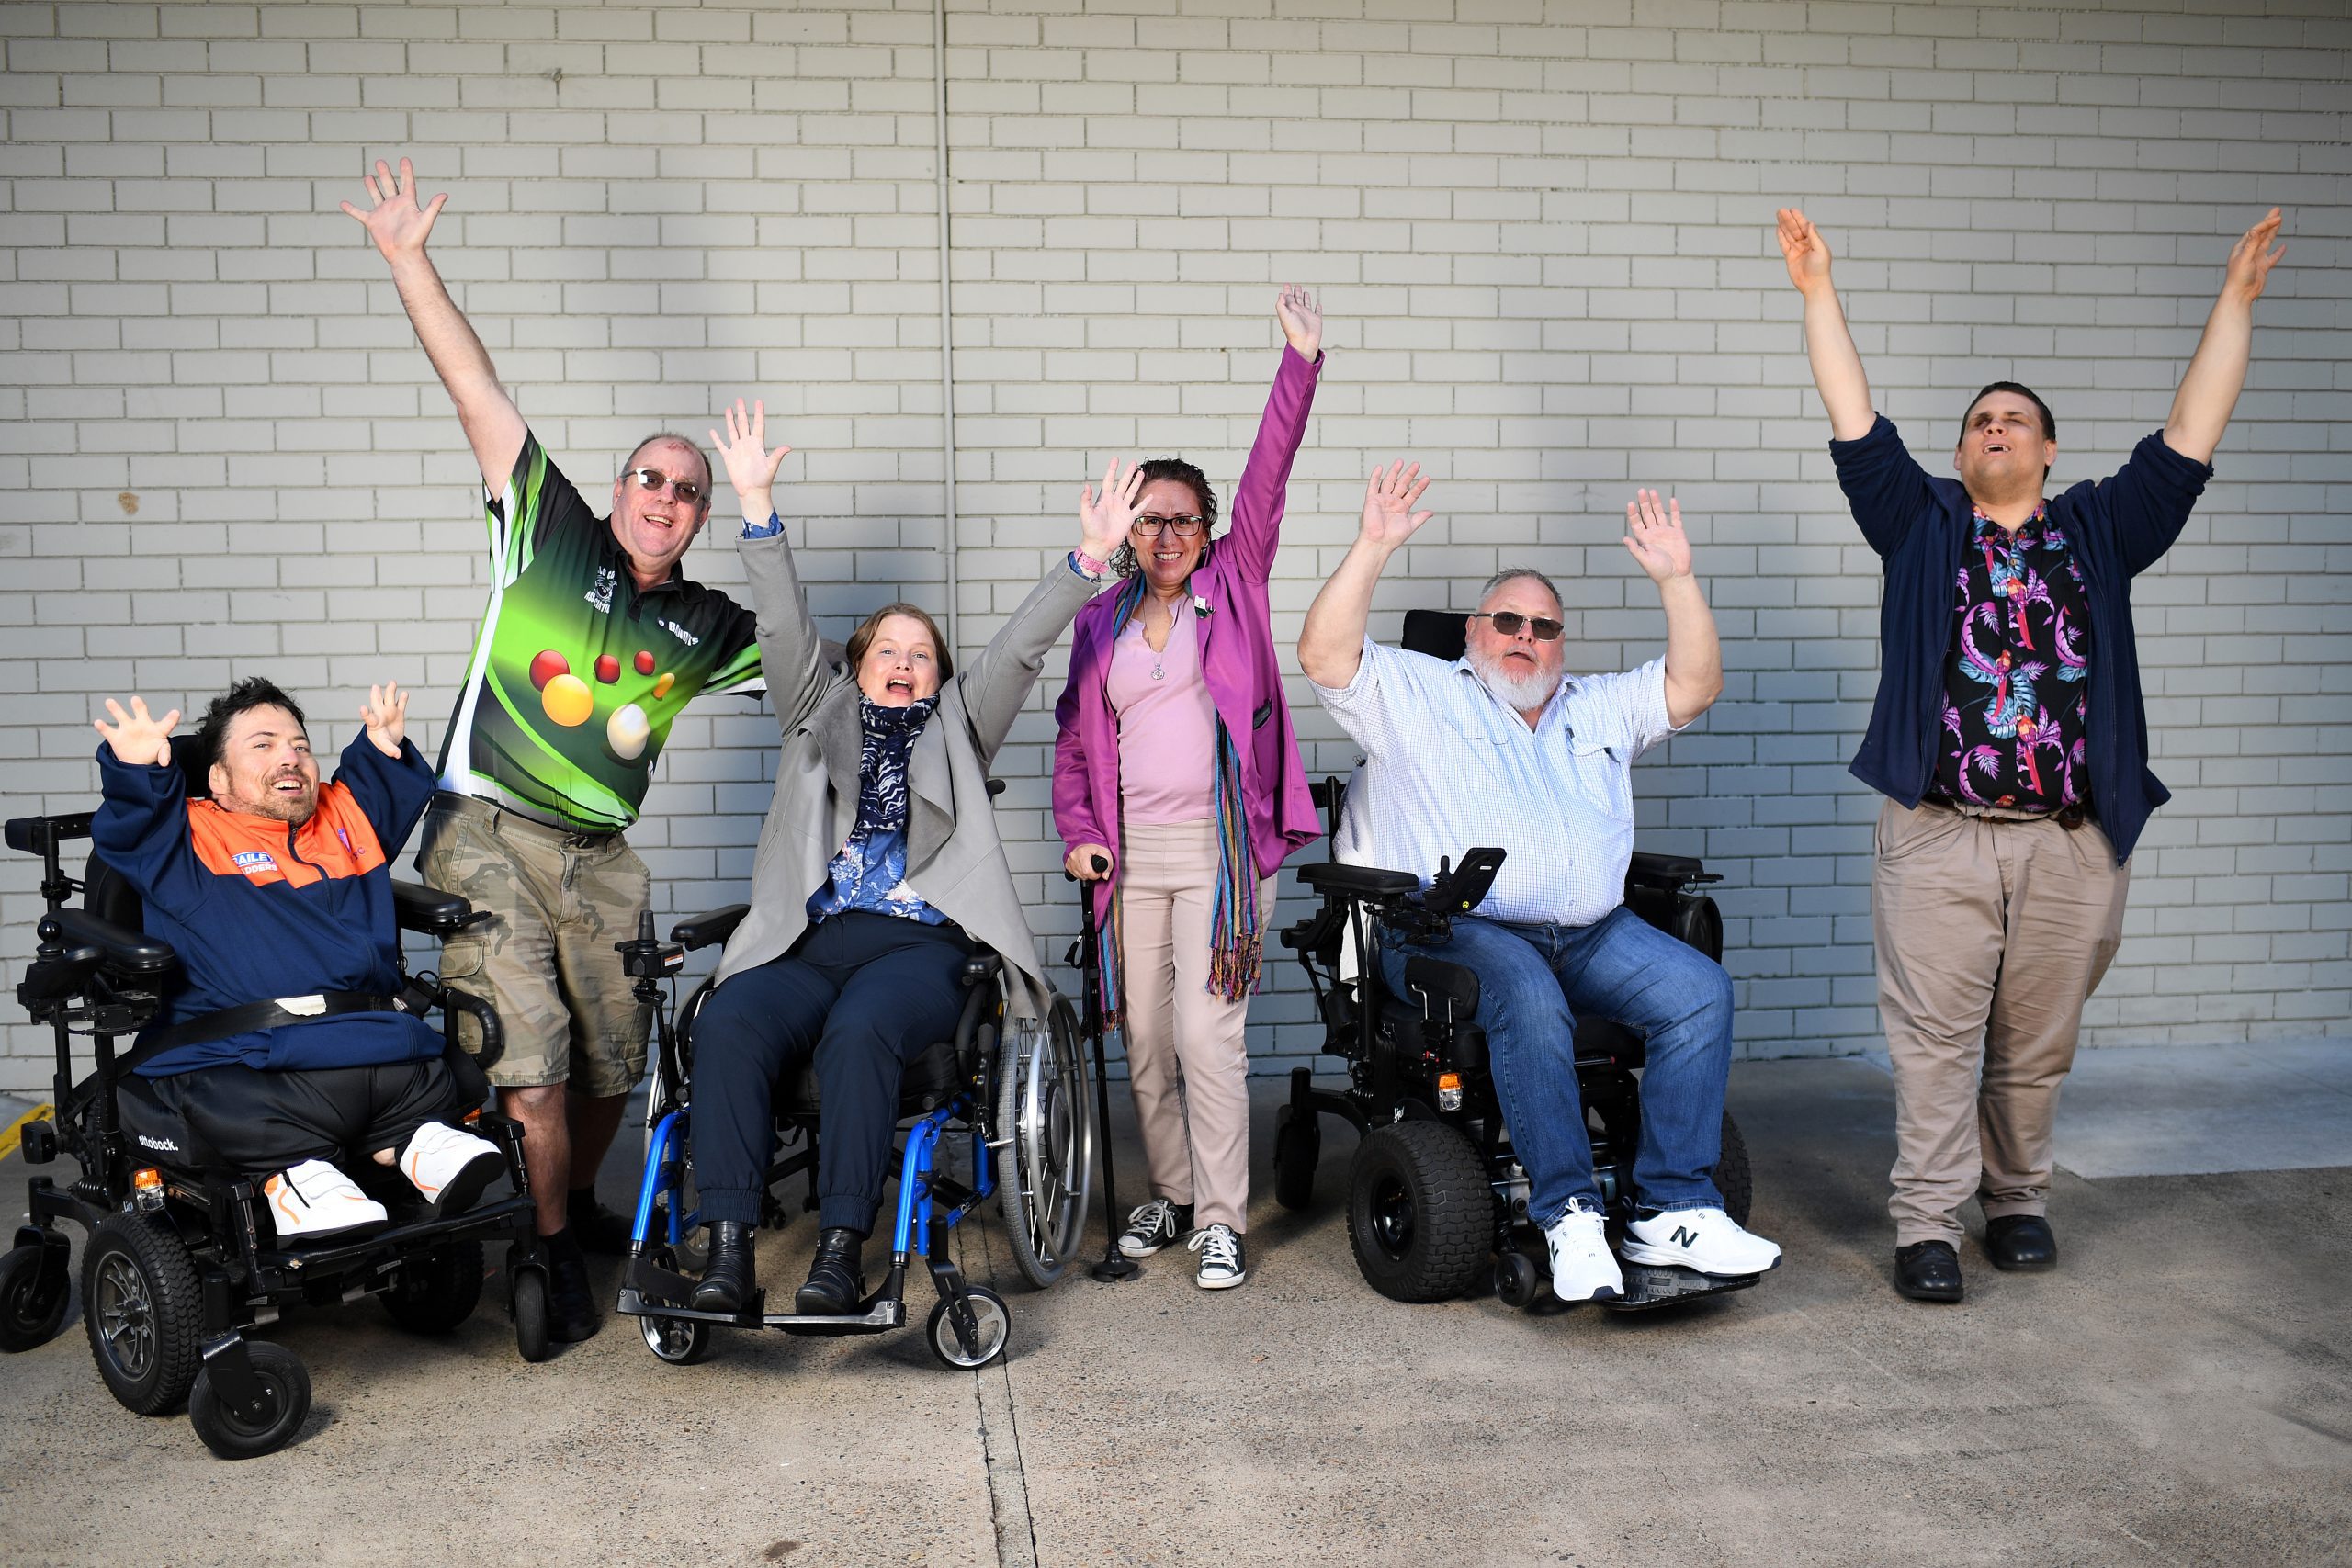 3 people are standing, 2 men and 1 woman, and 3 people in wheelchairs, 2 men and 1 woman, are all raising their arms in the air. They are standing in front of a white bricked wall.